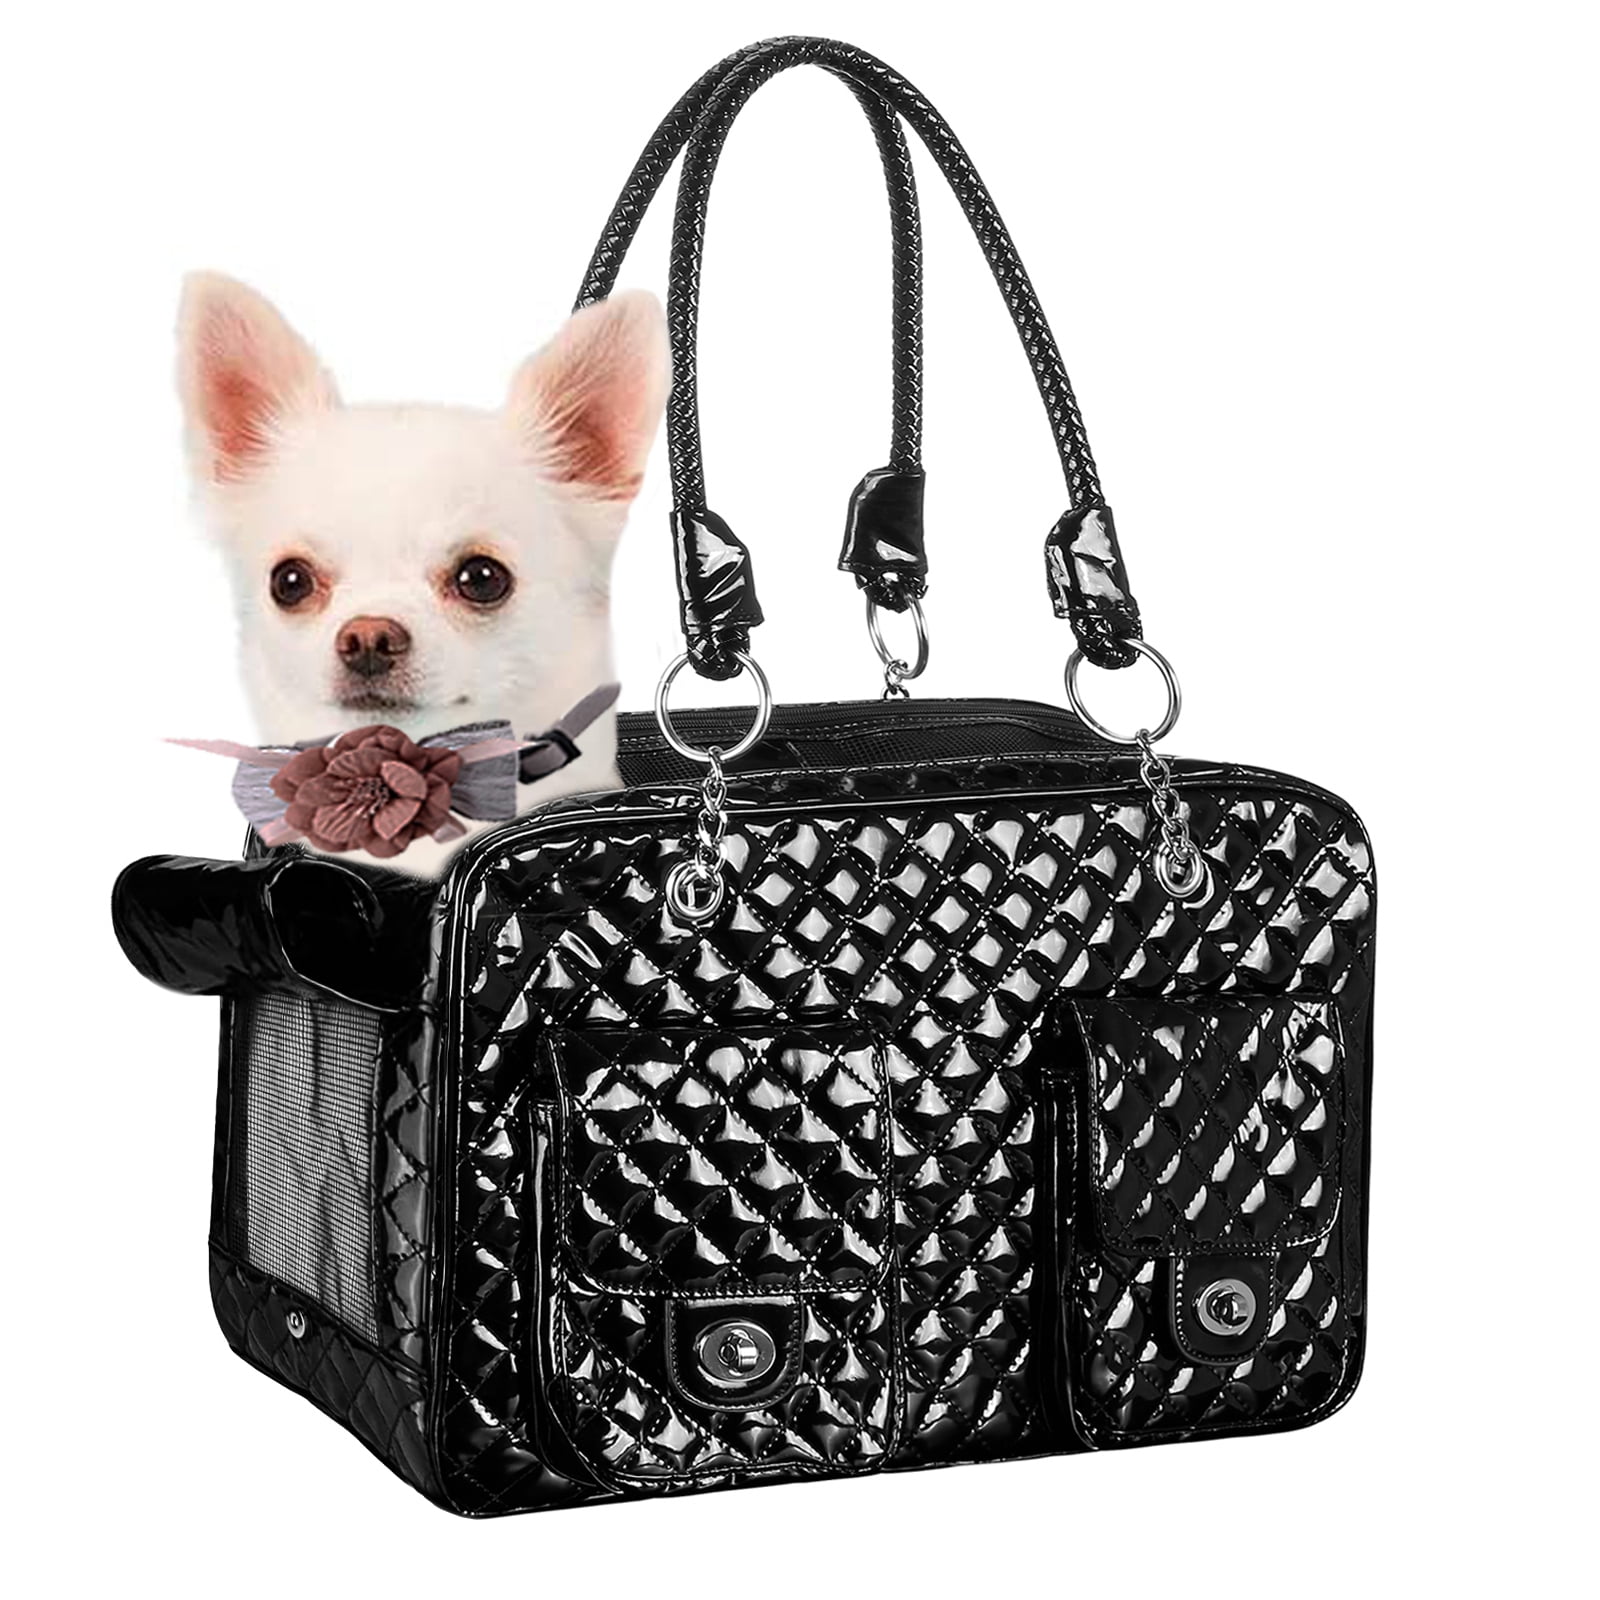 NewEle Fashion Dog Purse Carrier for Small Dogs with 2 Super-large Pockets, Holds Up to 10lbs PU Leather Pet Carrier, Cat Carrier, Airline Approved